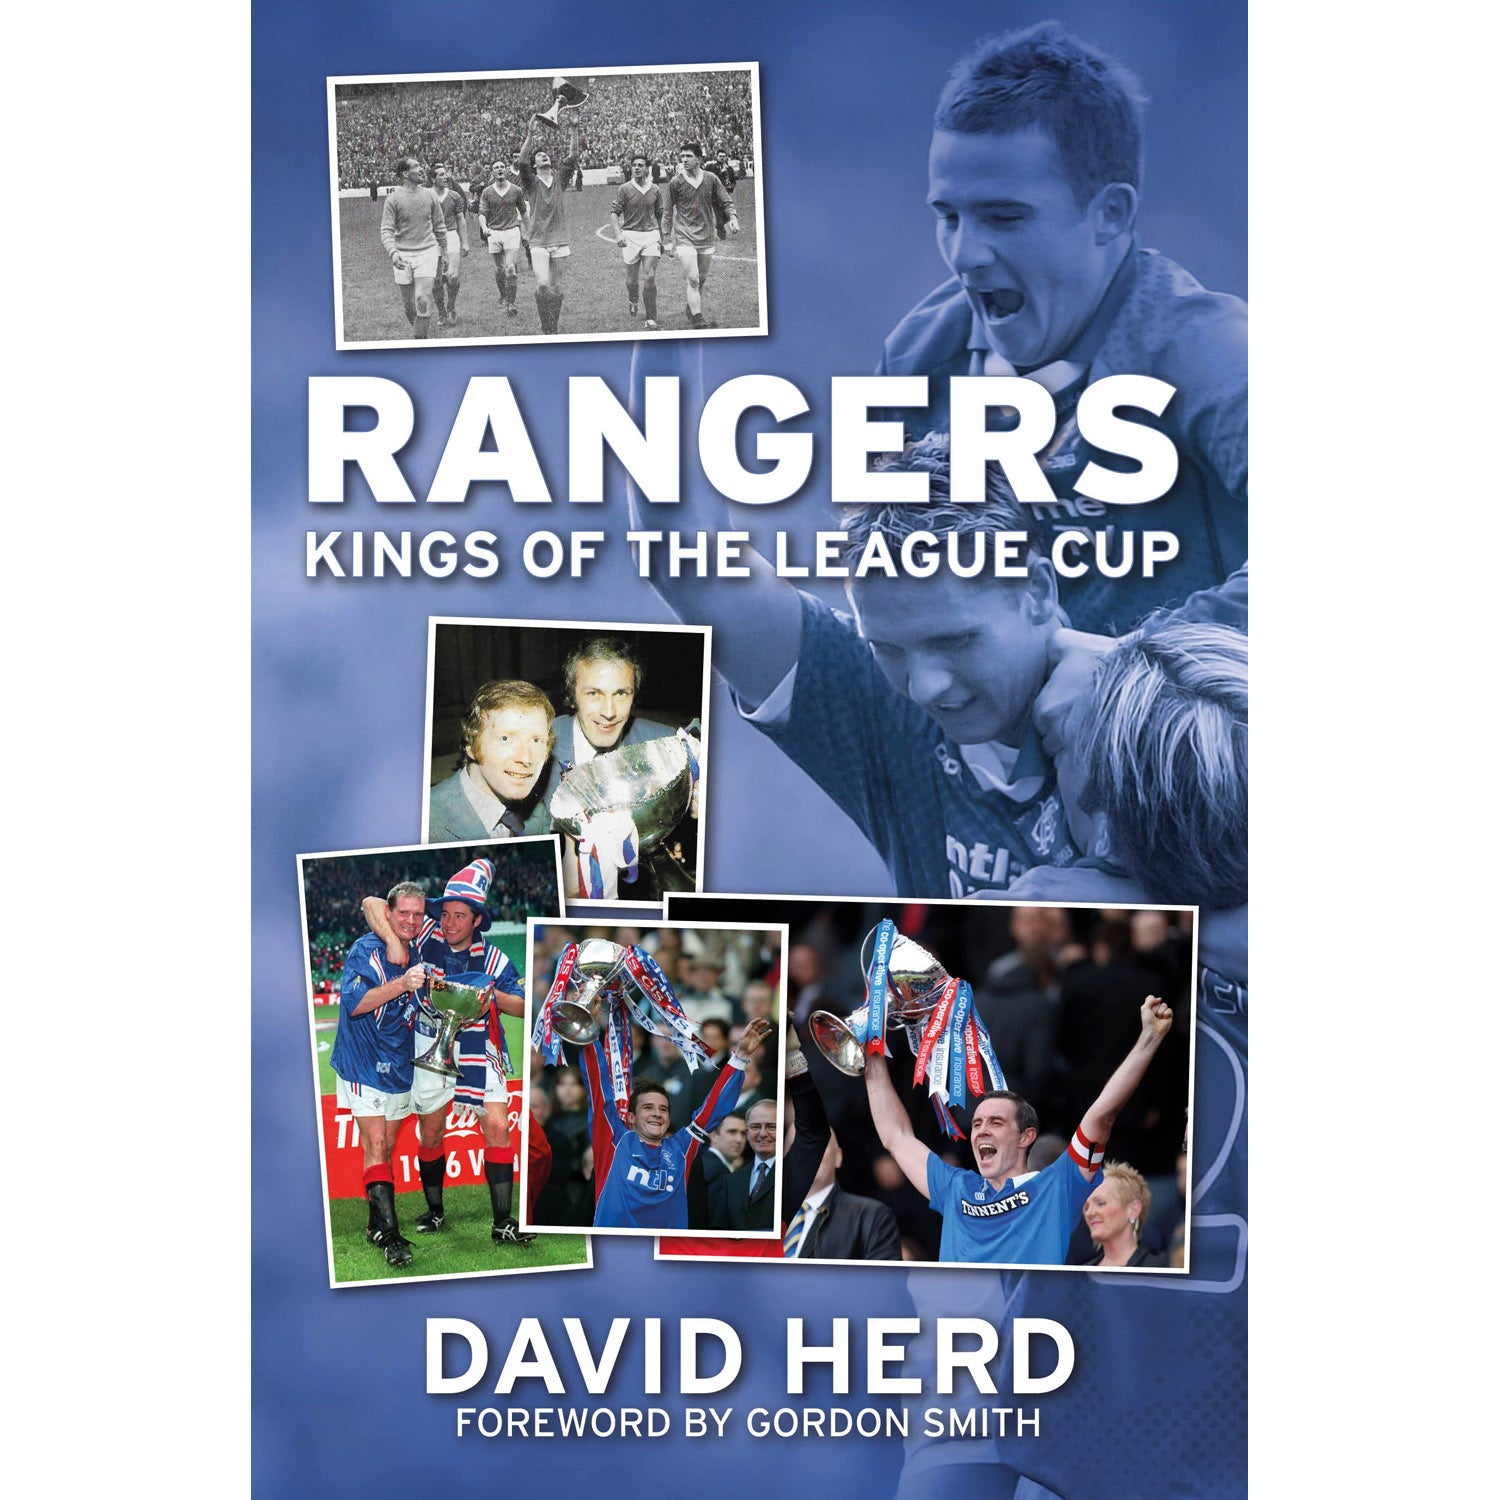 Rangers – Kings of the League Cup